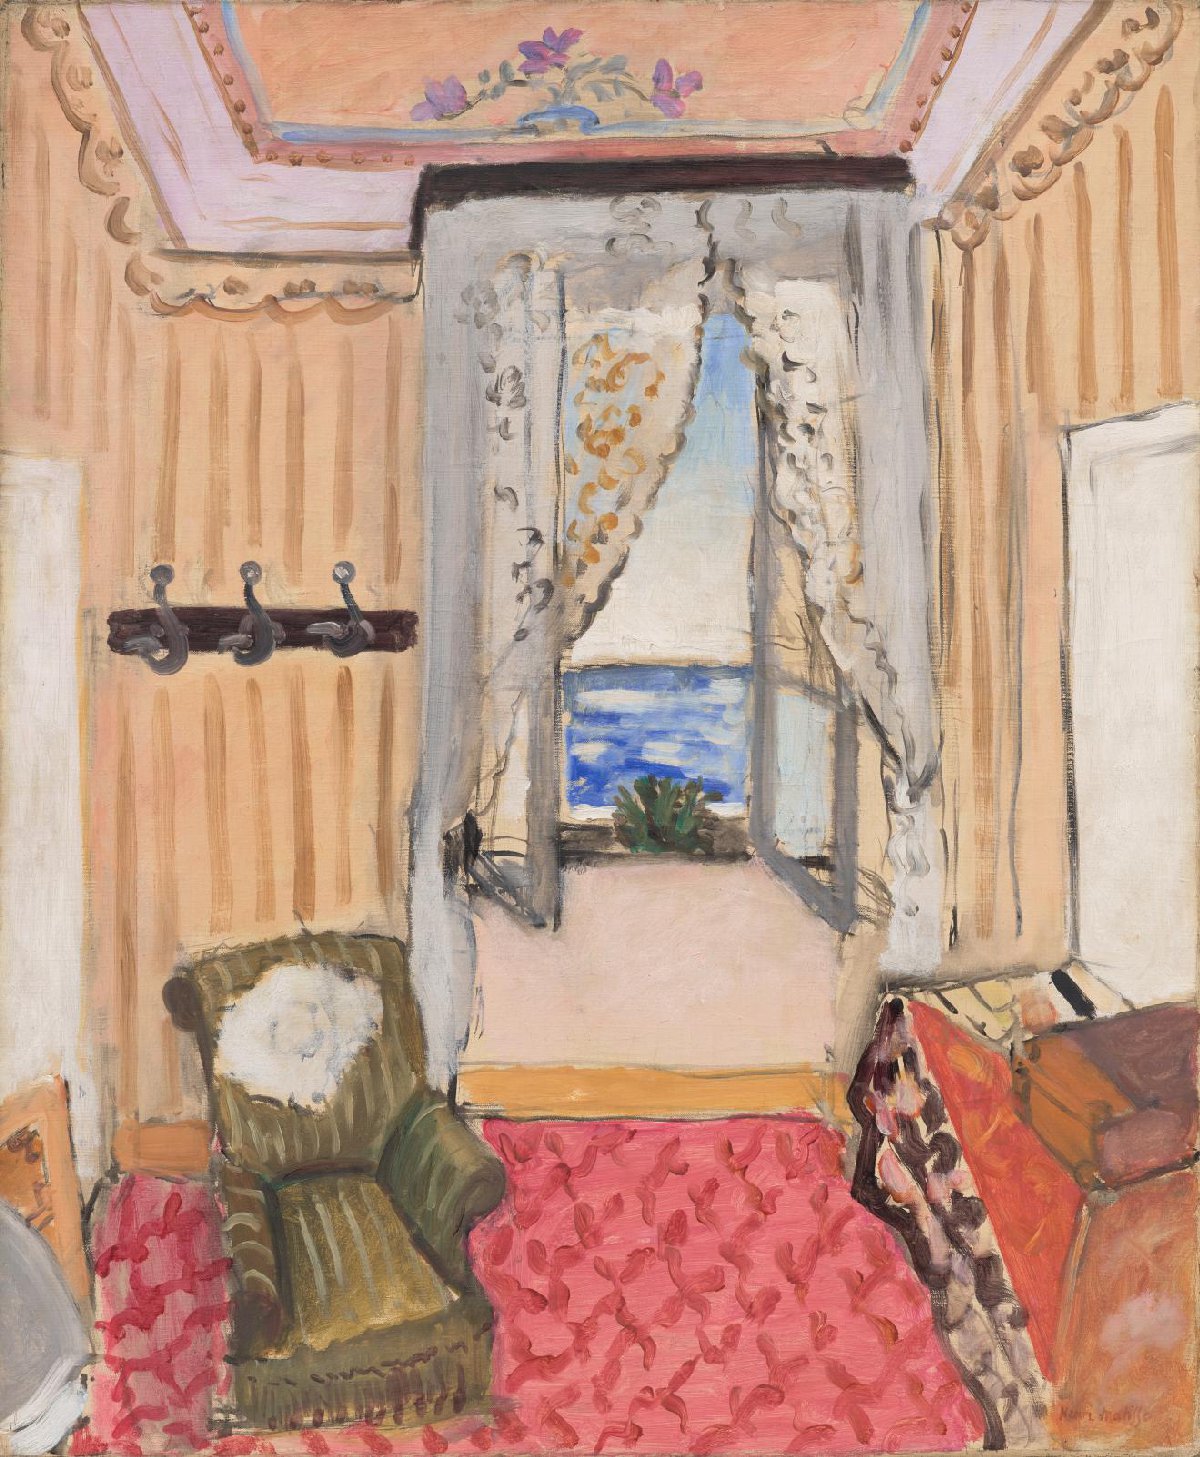 A painting shows half of a room with an armchair, decorated ceiling, and open window with white drapes and a view of the sea.